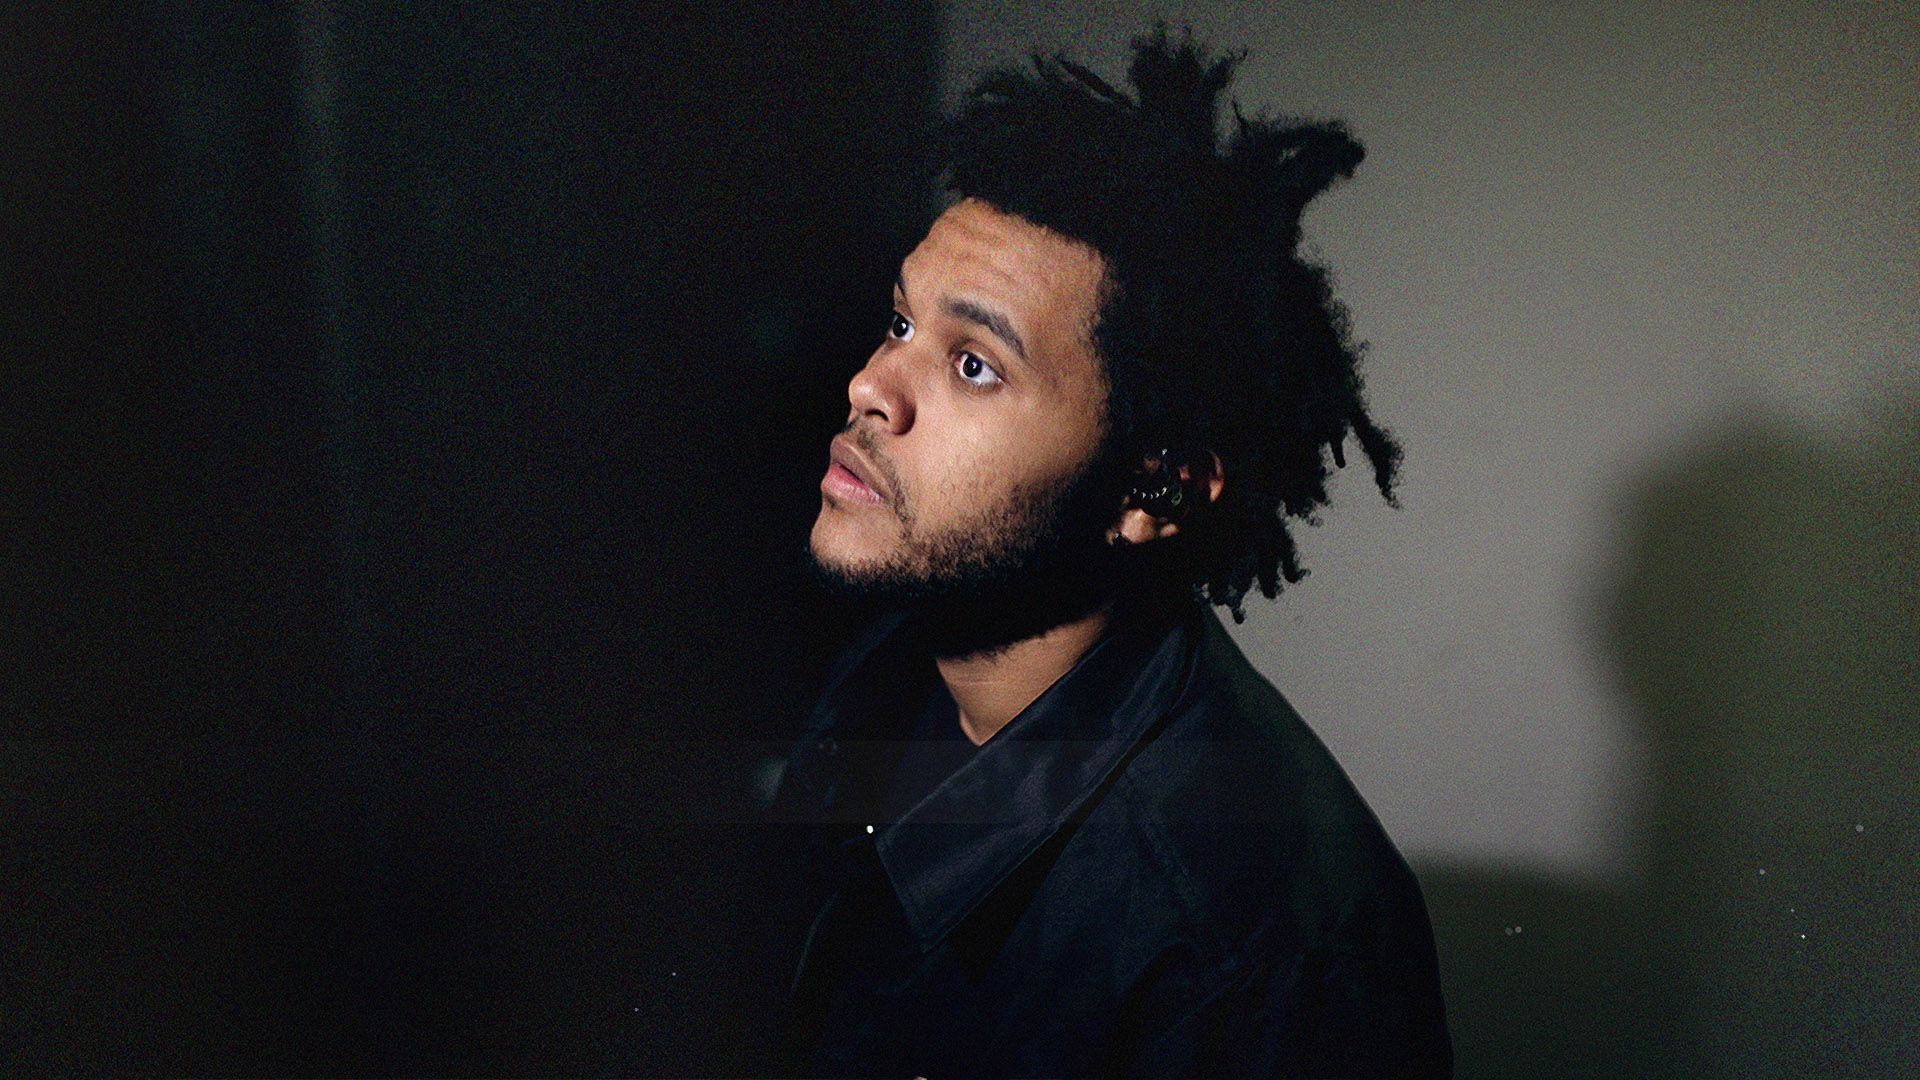 The Weeknd HD Wallpaper, Live The Weeknd HD Image High Quality